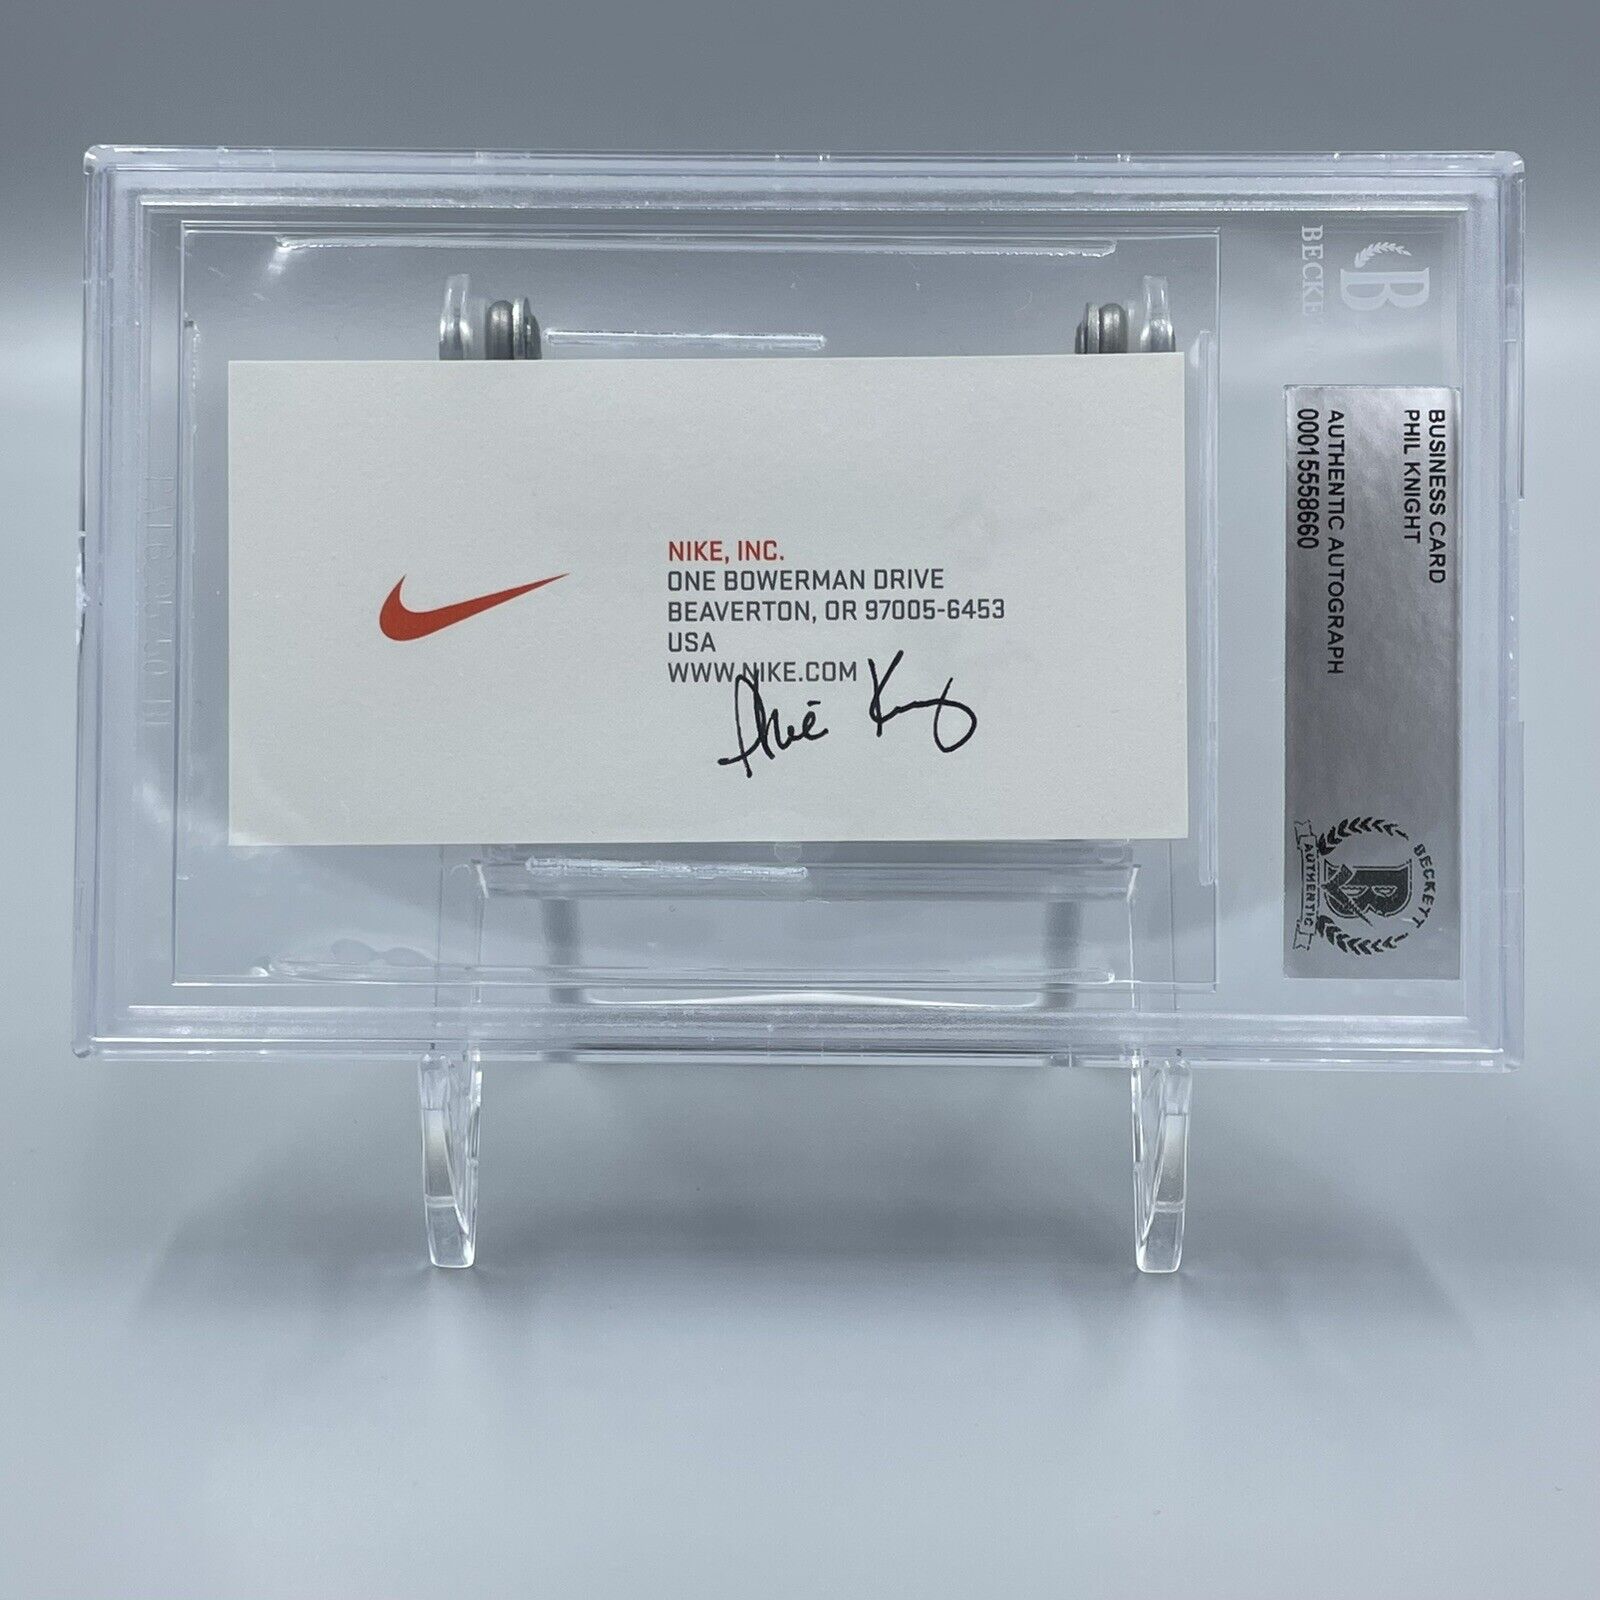 Phil Knight Signed Autographed Nike Business Card Beckett BAS LeBron James Image